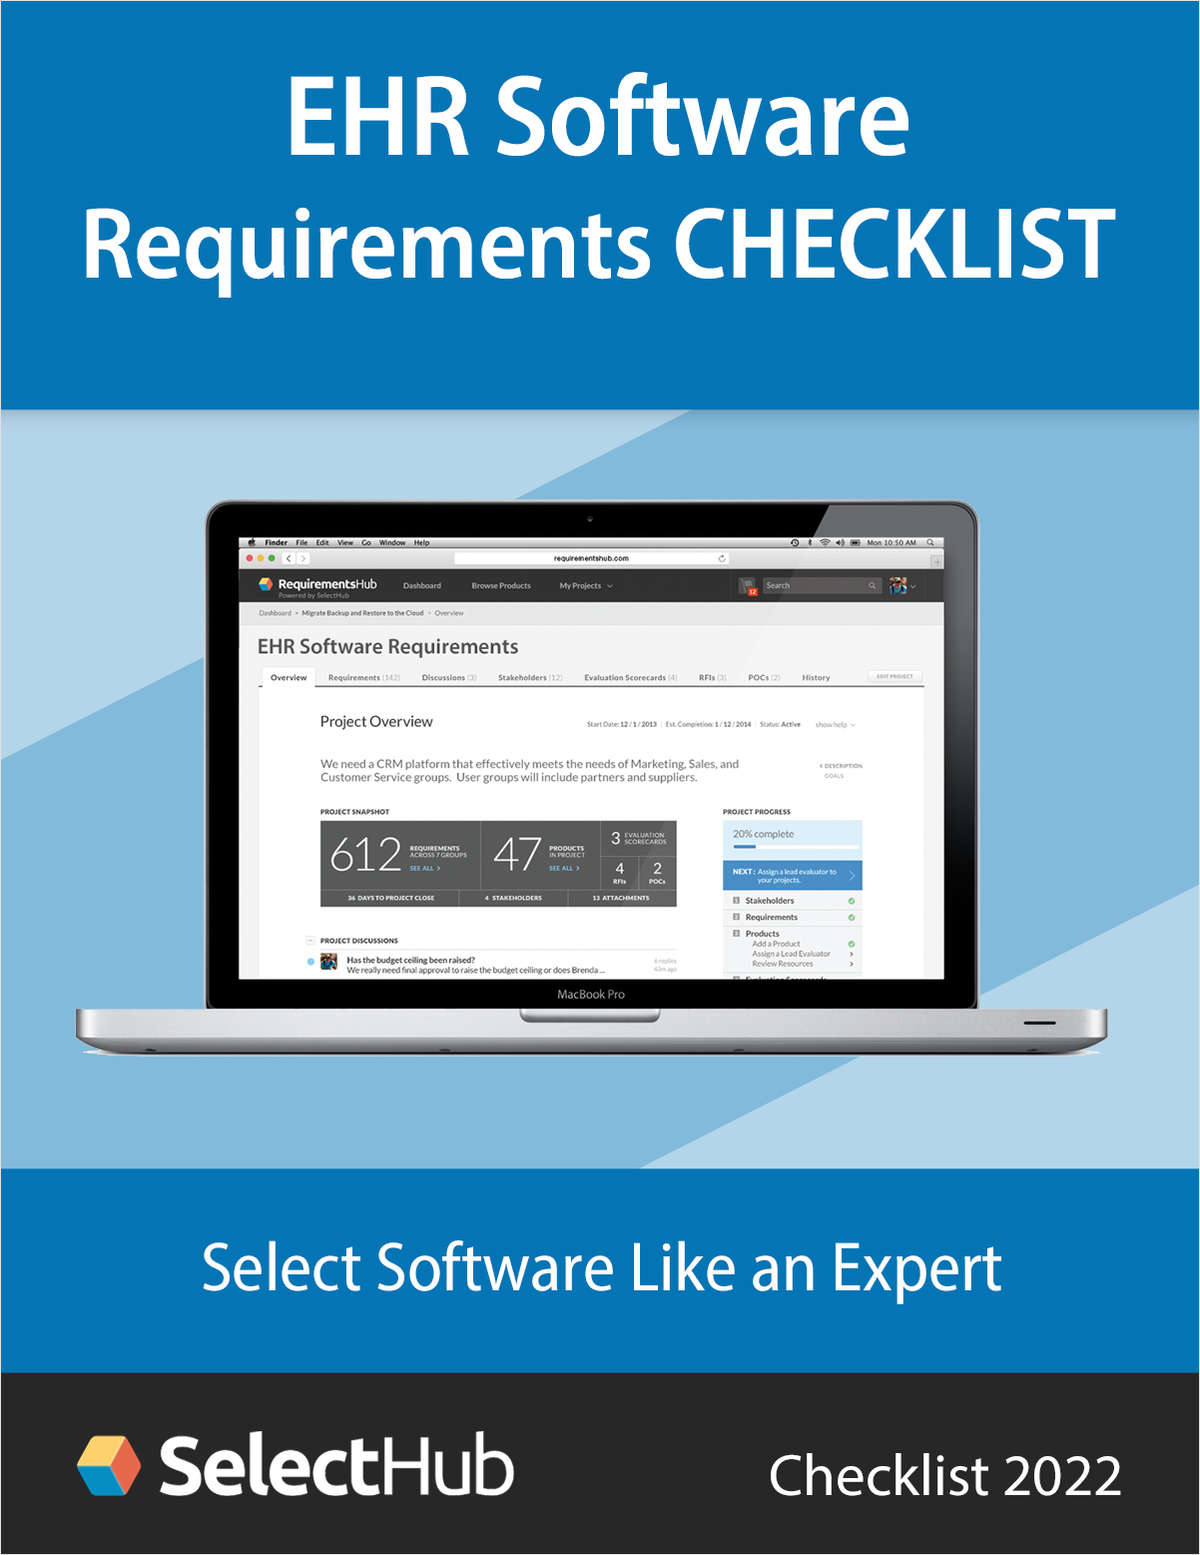 EHR Software Requirements Checklist for 2022